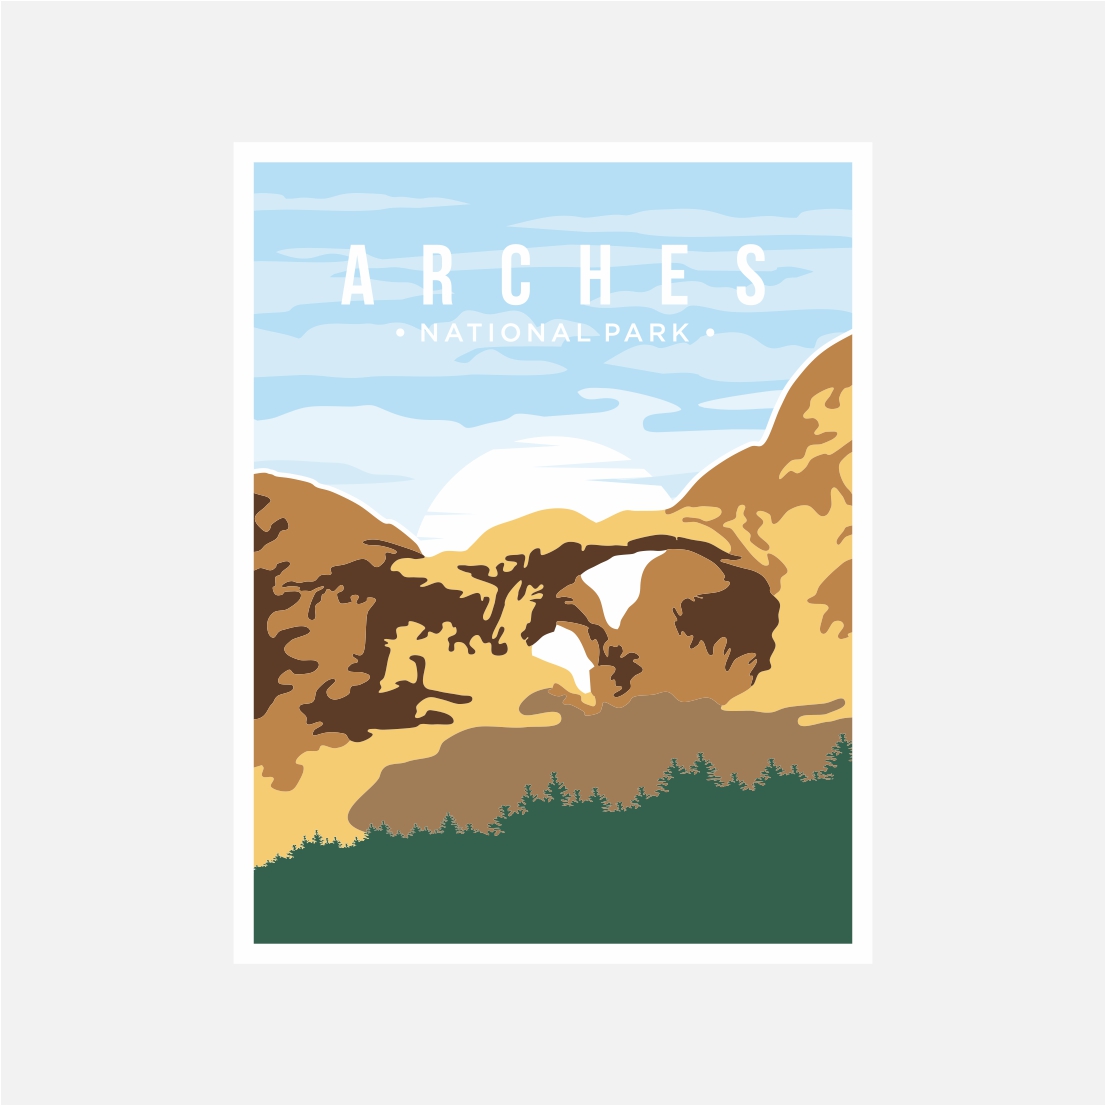 Arches National Park poster vector illustration design - only $8 preview image.